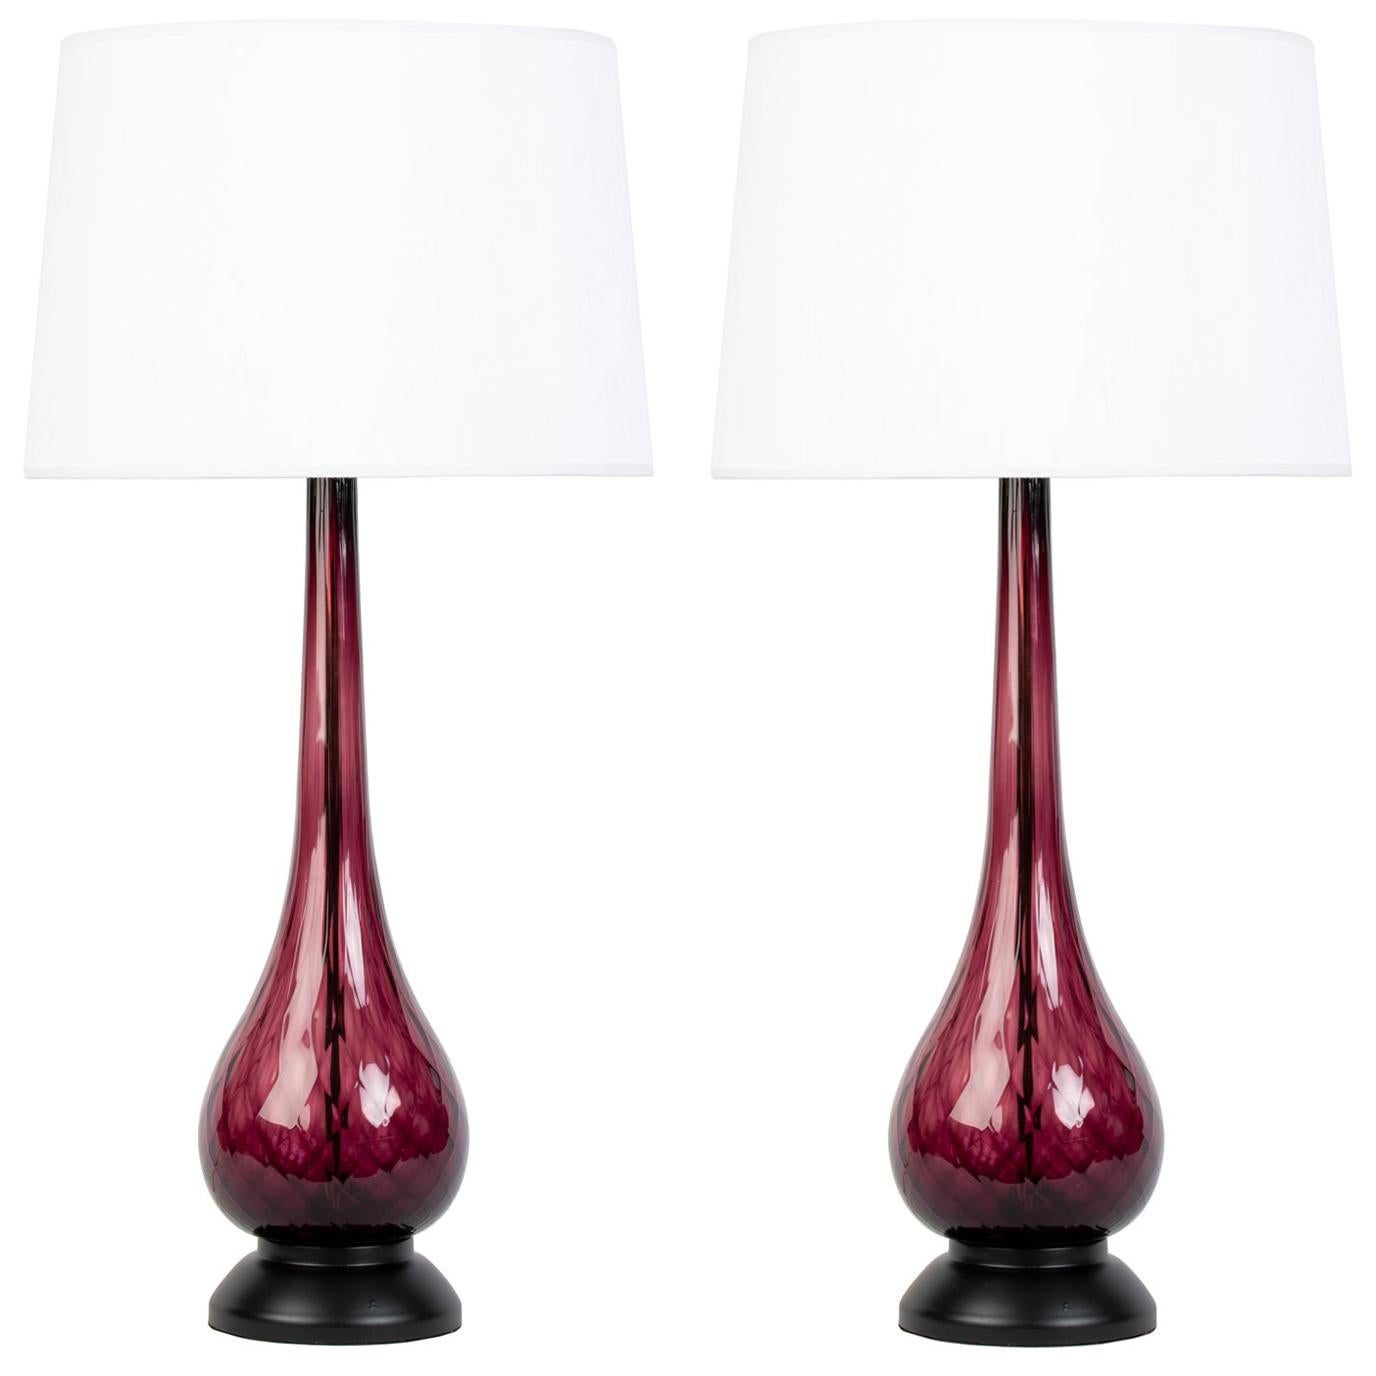 Pair of Midcentury Amethyst Colored Lamps Attributed to Blenko Glass